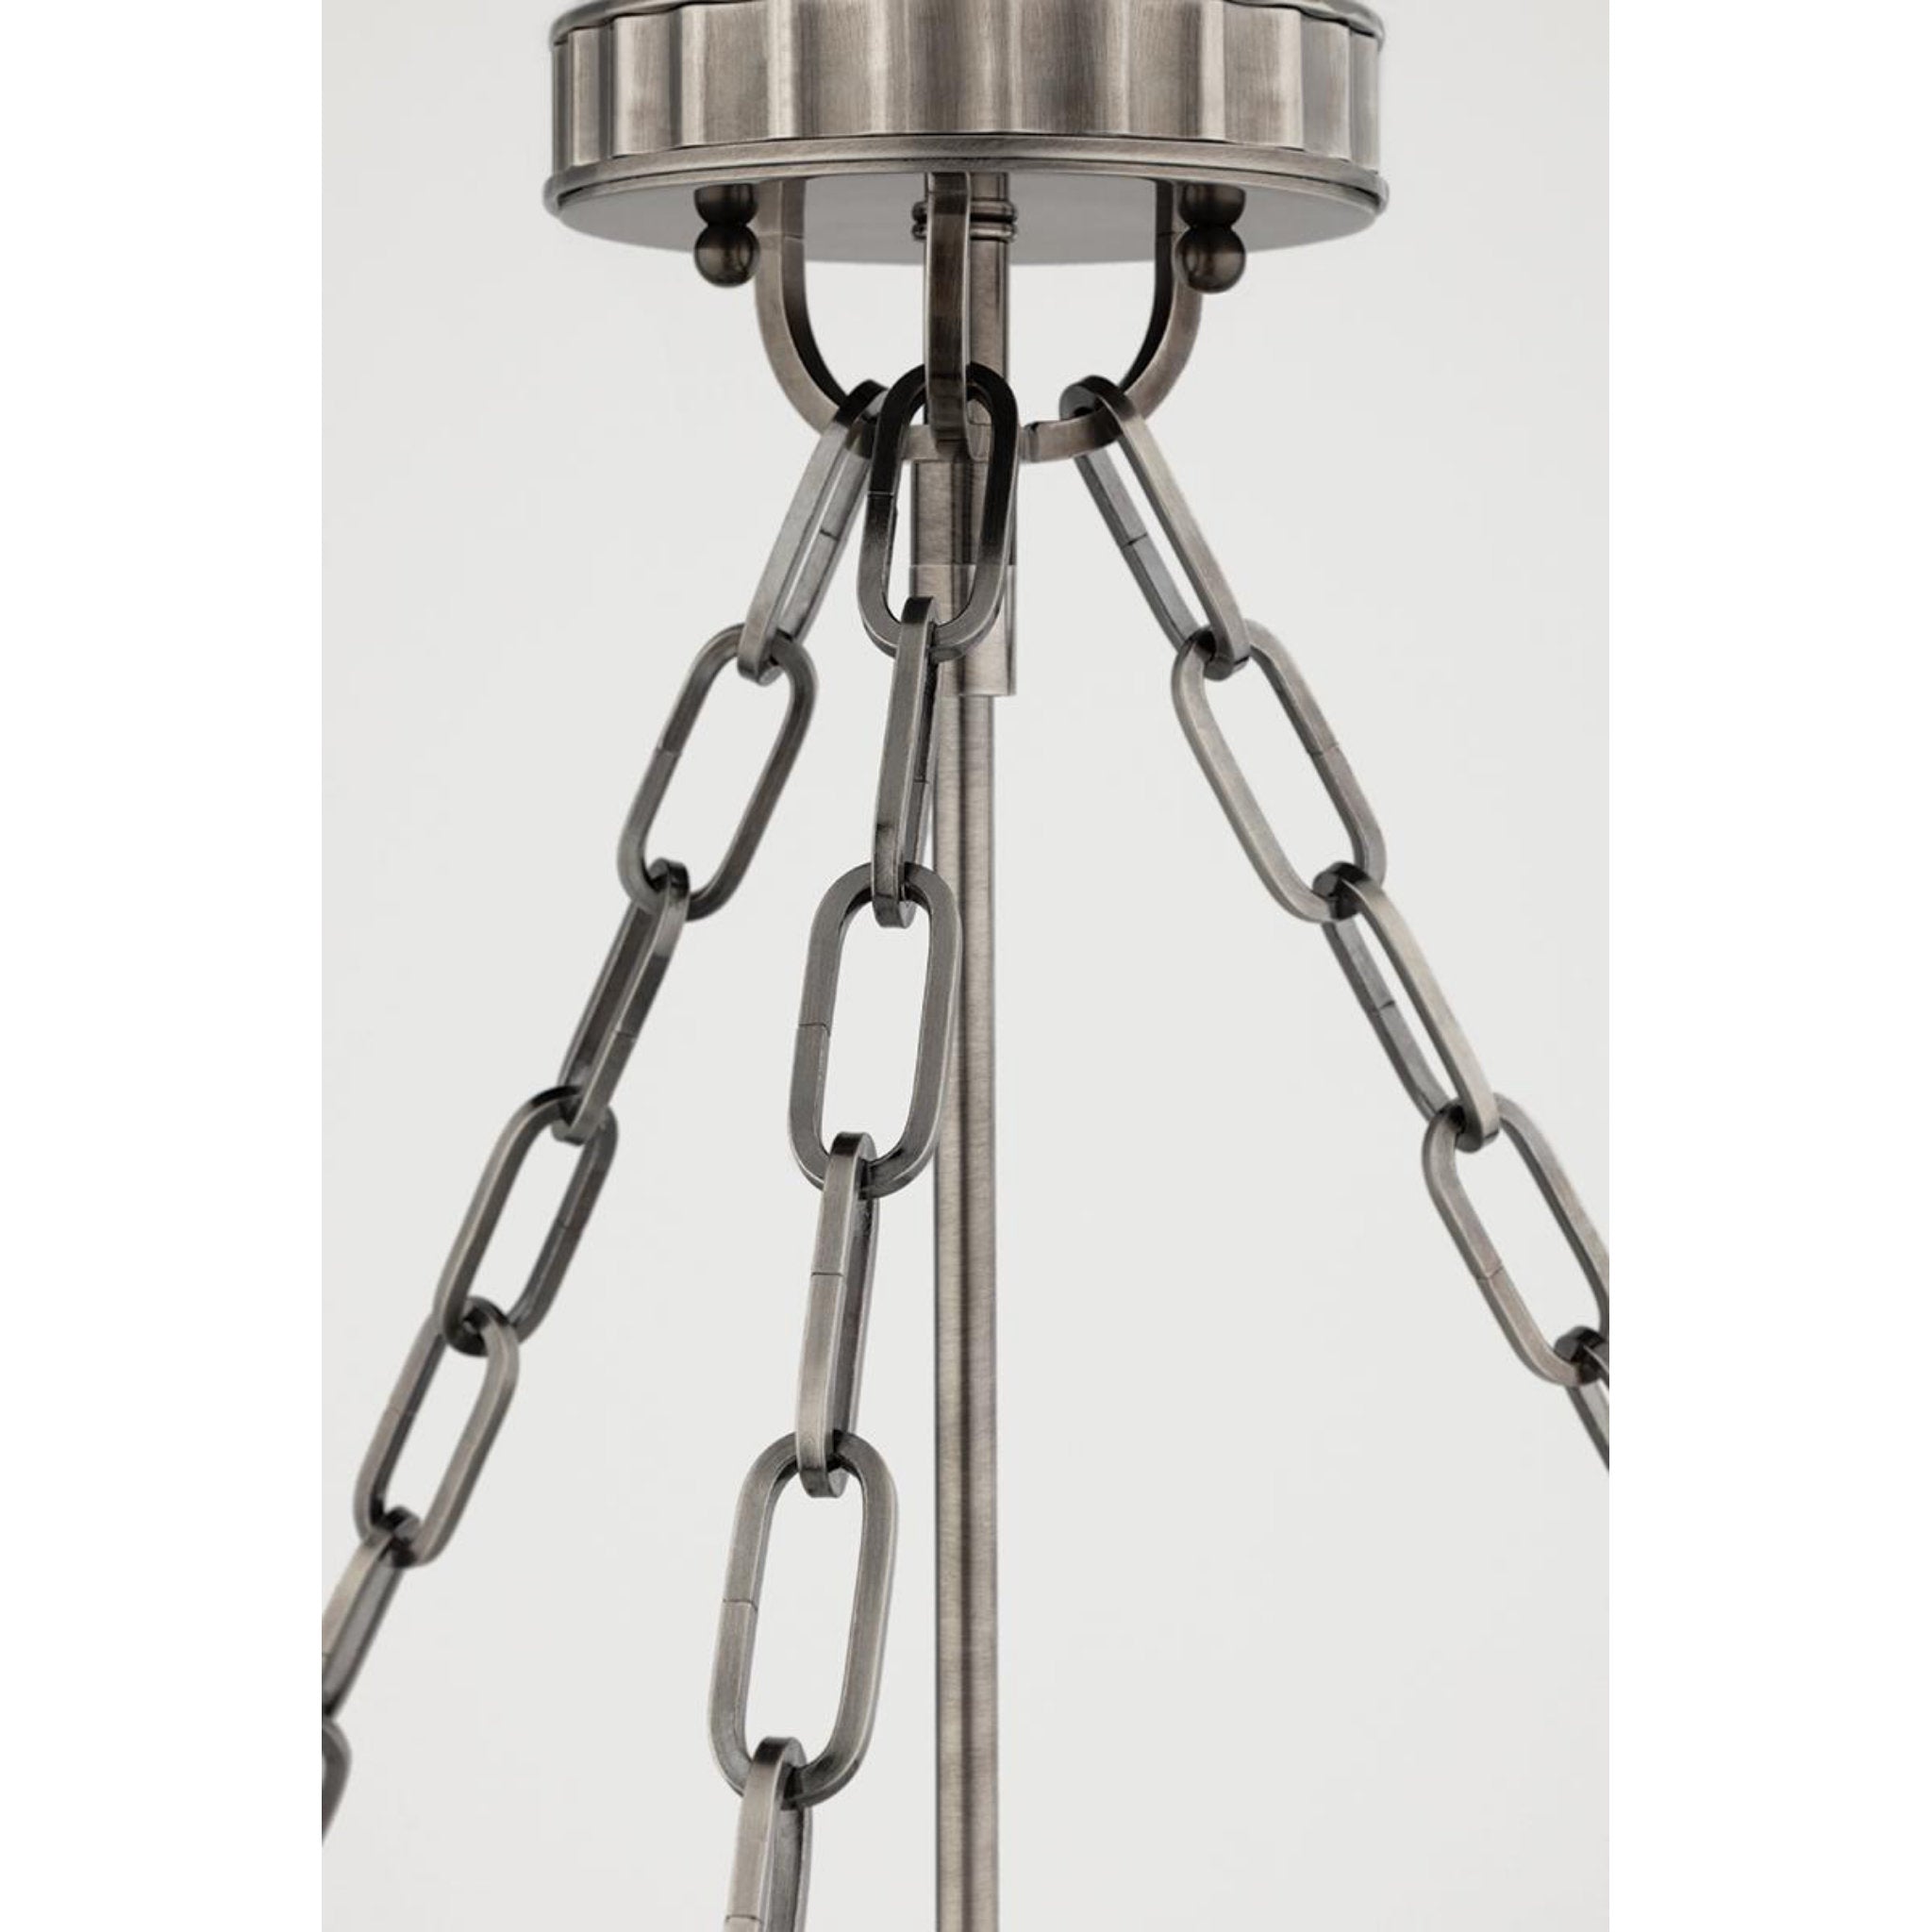 Middlebury 8 Light Pendant in Polished Nickel